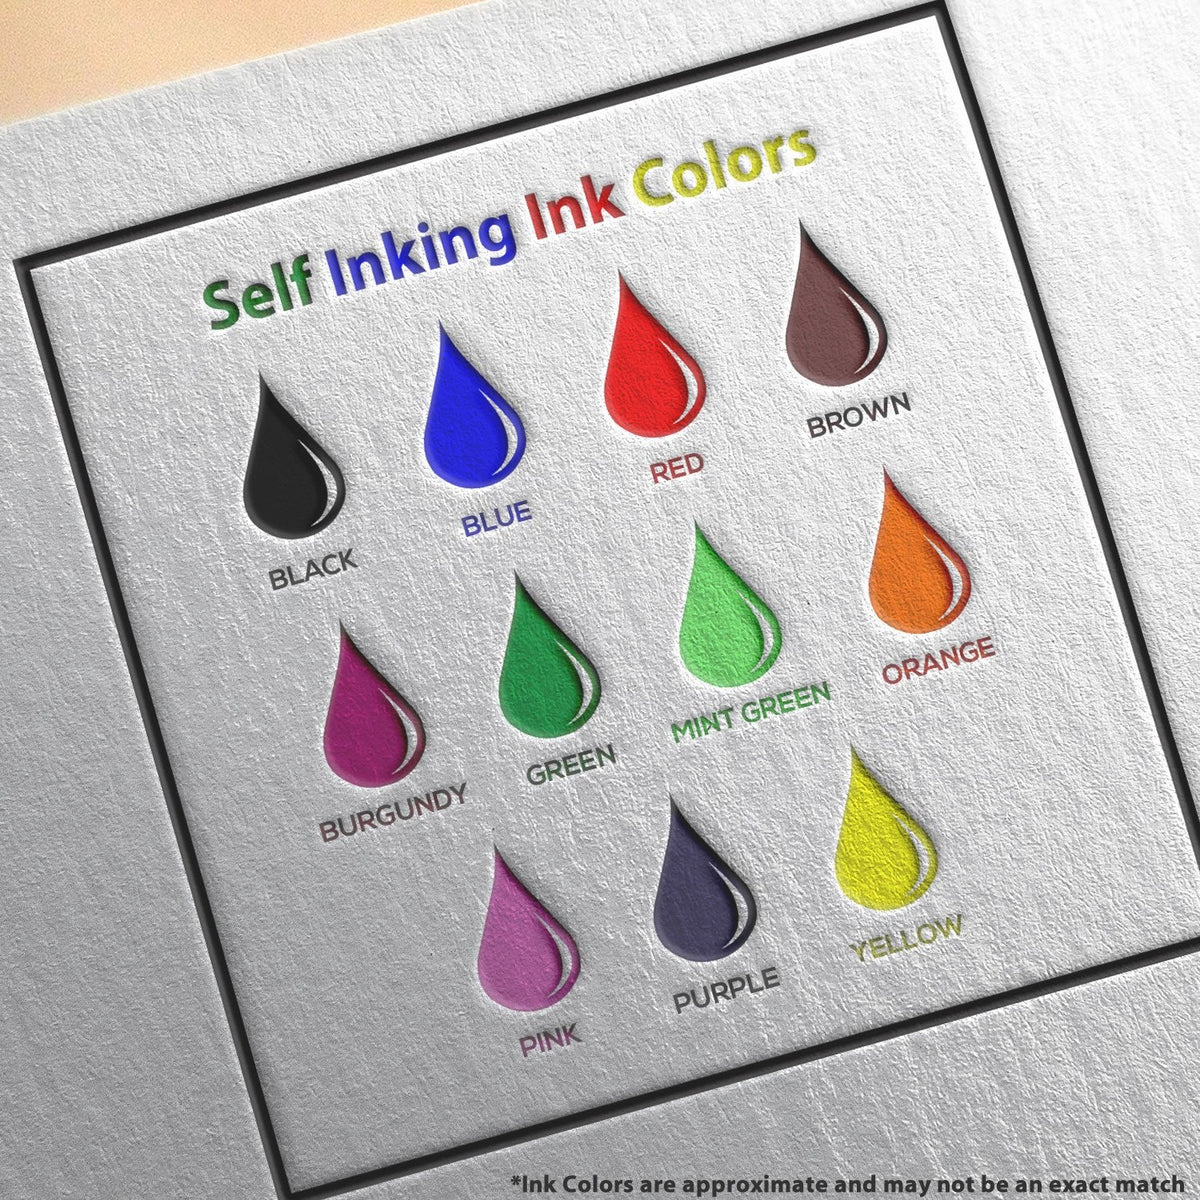 Self-Inking Please Forward Insurance Form Stamp Ink Color Options